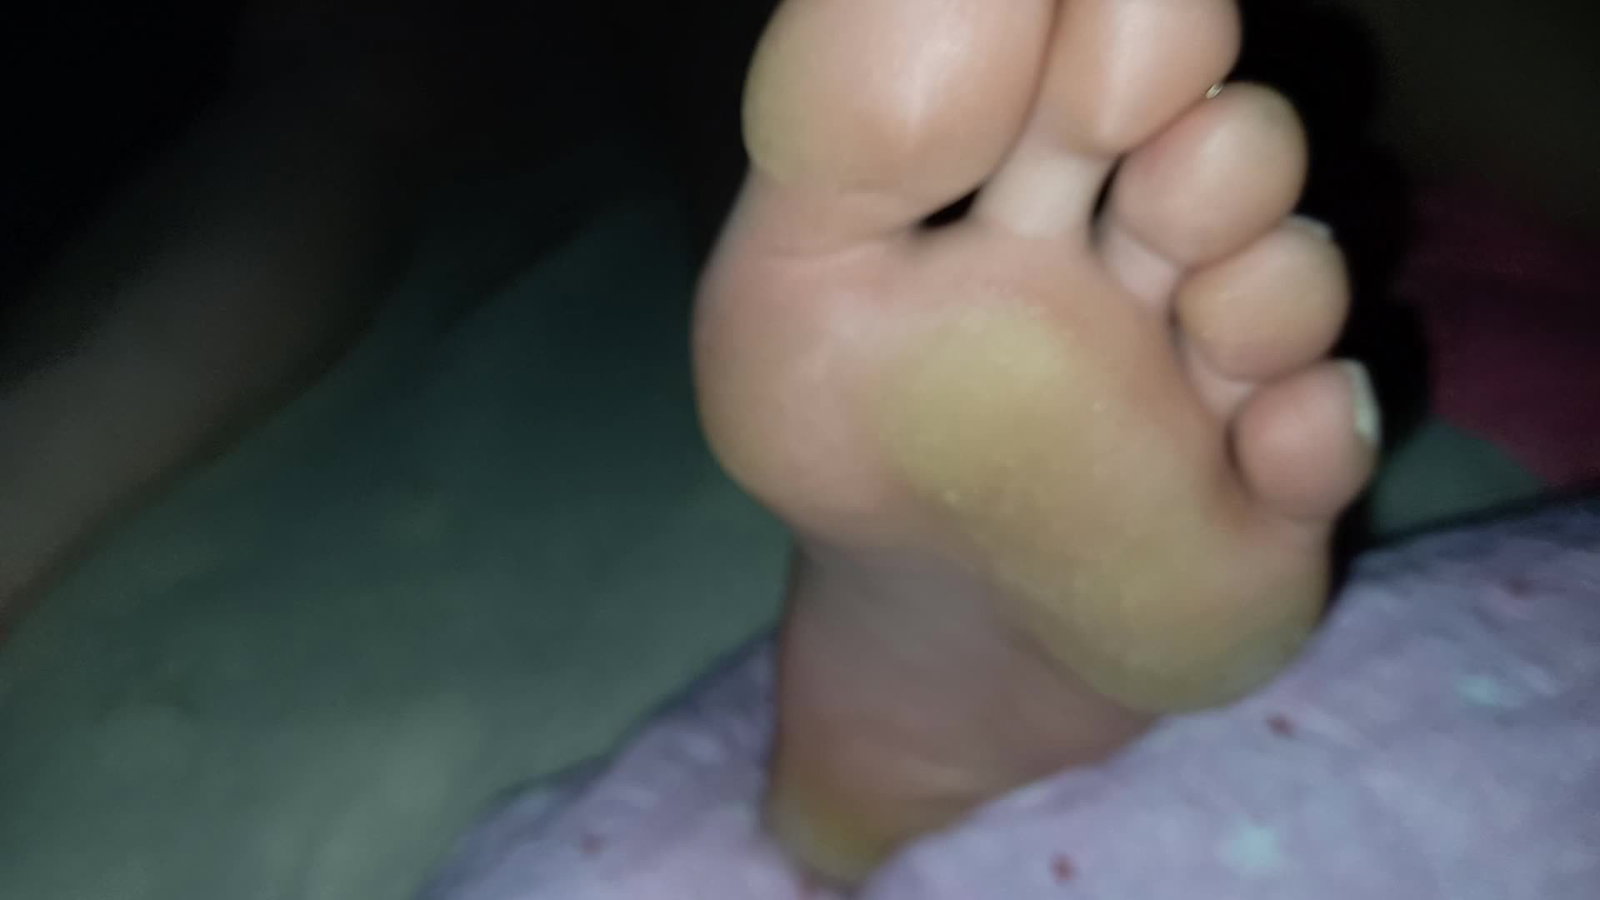 Watch the Video by PervertPair93 with the username @PervertPair93, posted on April 8, 2021. The post is about the topic Exposed Wife. and the text says 'I love her little feet and soles.  Showing her naked turns me on when she doesn't know it'